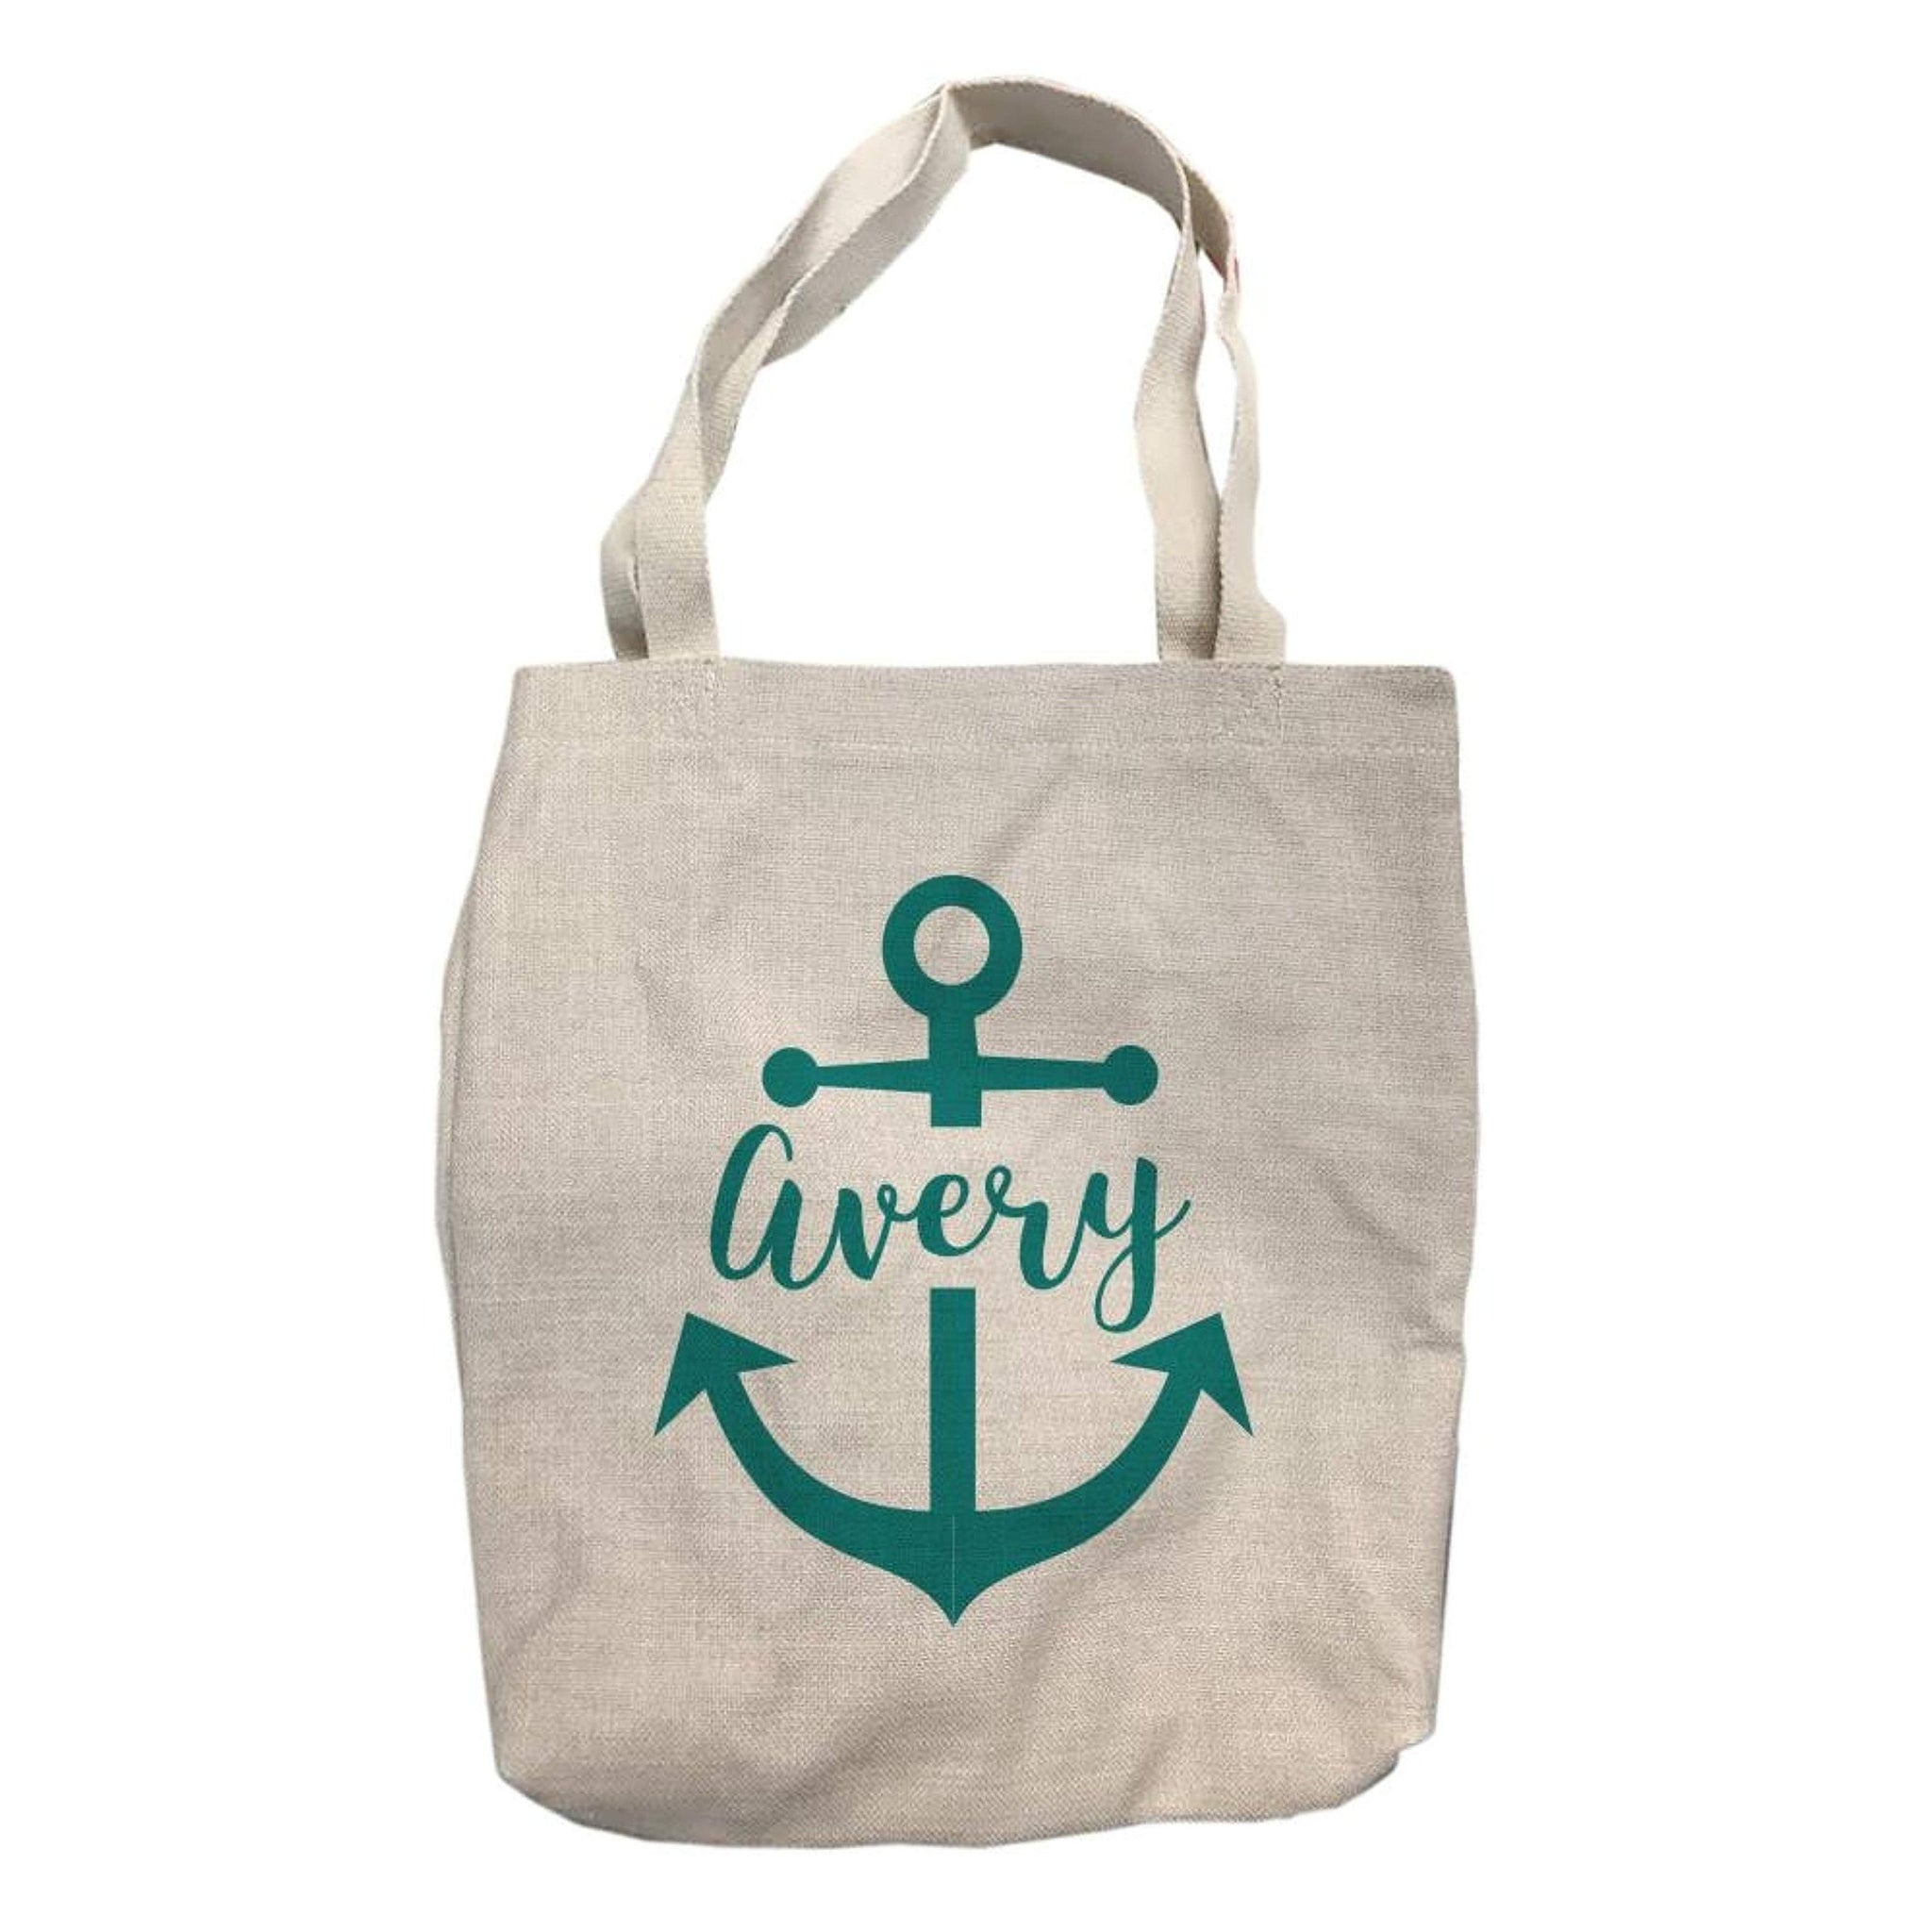 Personalized Nautical Anchor Tote Bag with Name - Script Font